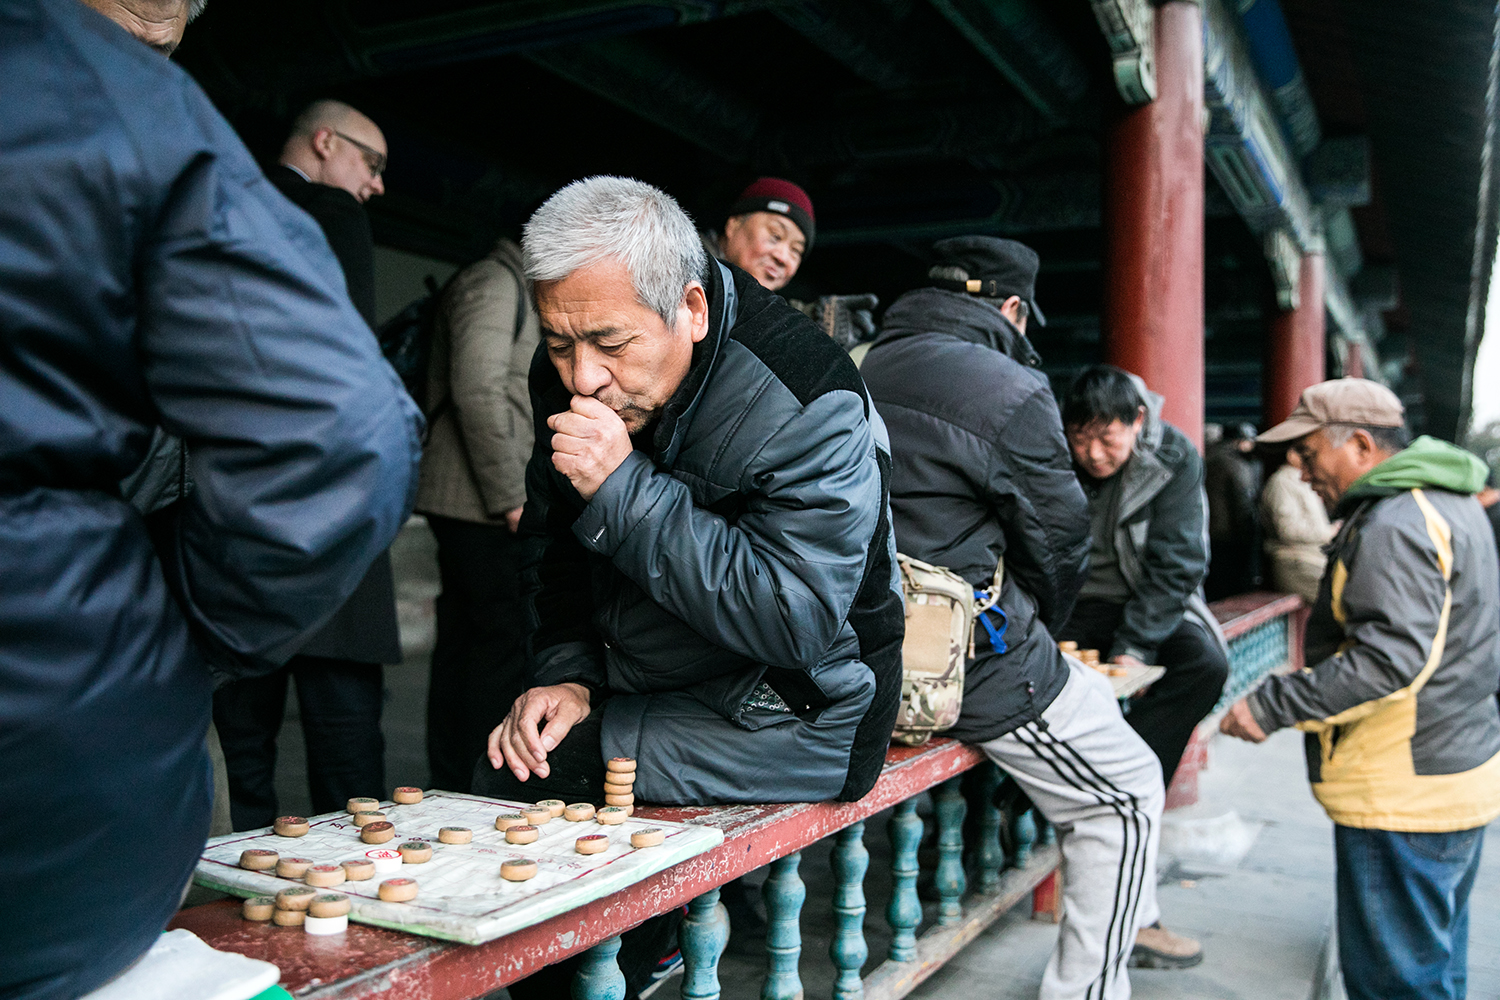 A man warms up his hands between plays. Even though it is only a mere 7°C, people are still outside, enjoying the gardens of the Temple, as well as each others company.